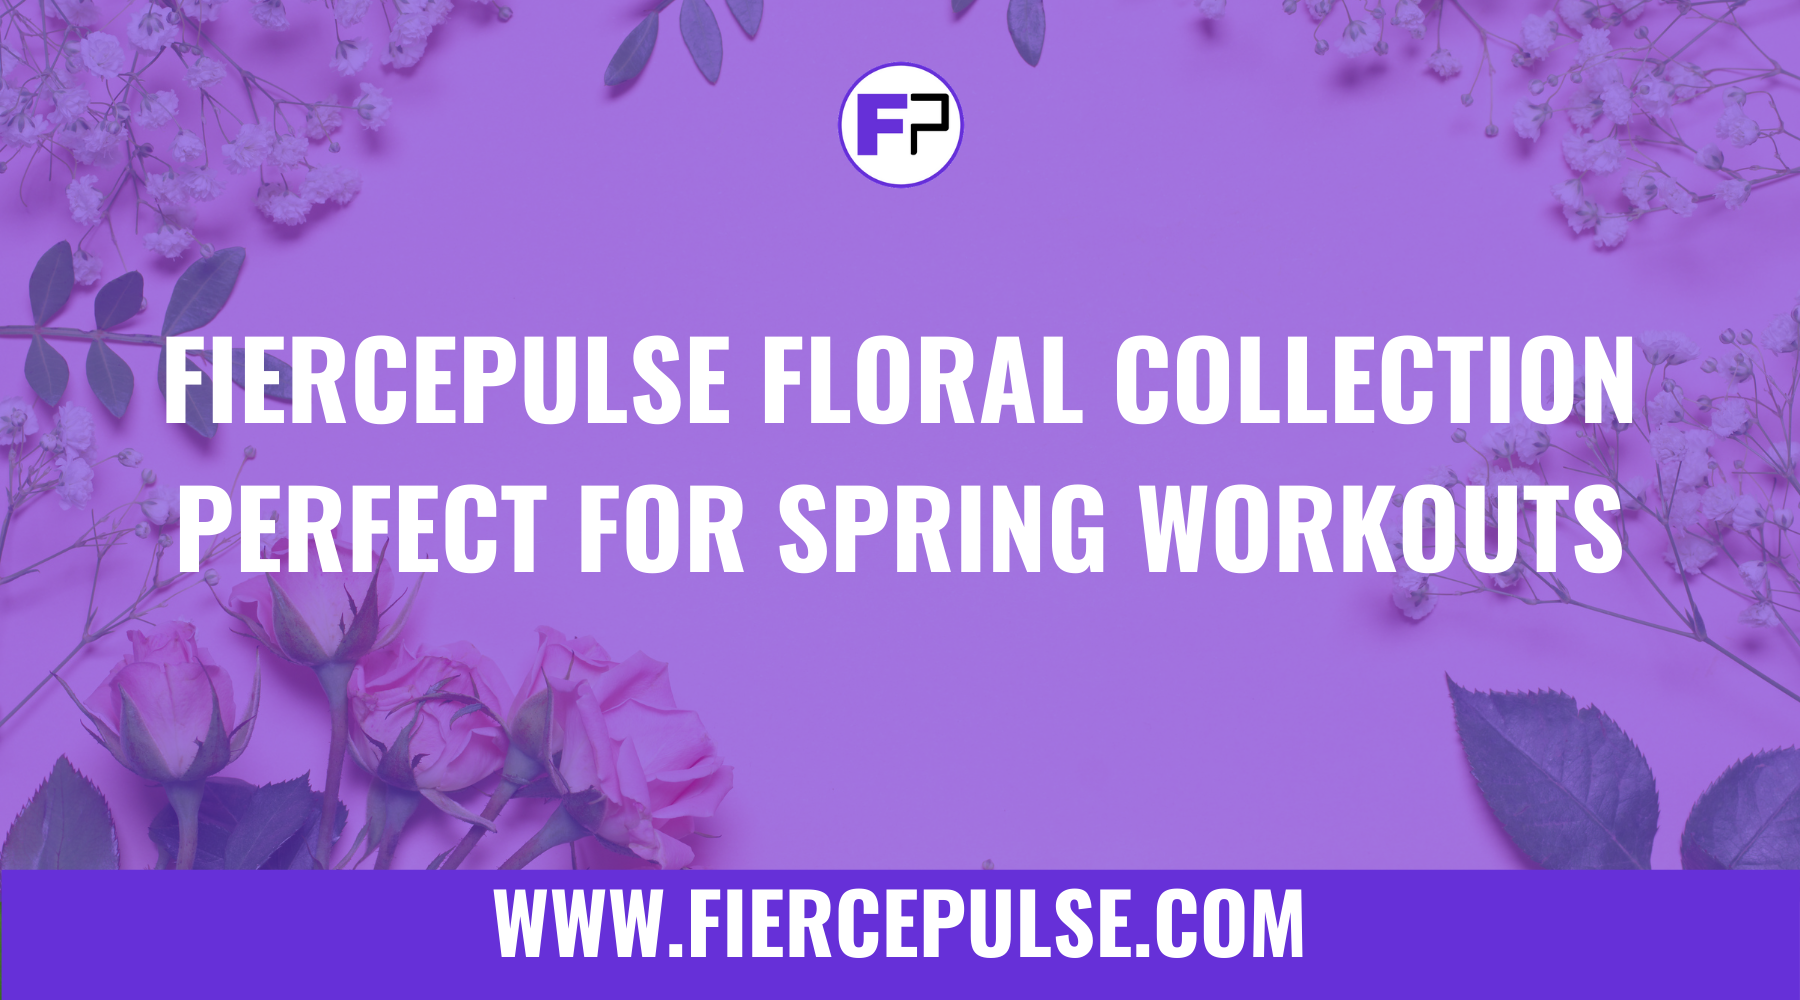 FIERCEPULSE Floral Collection - Perfect for Spring Workouts